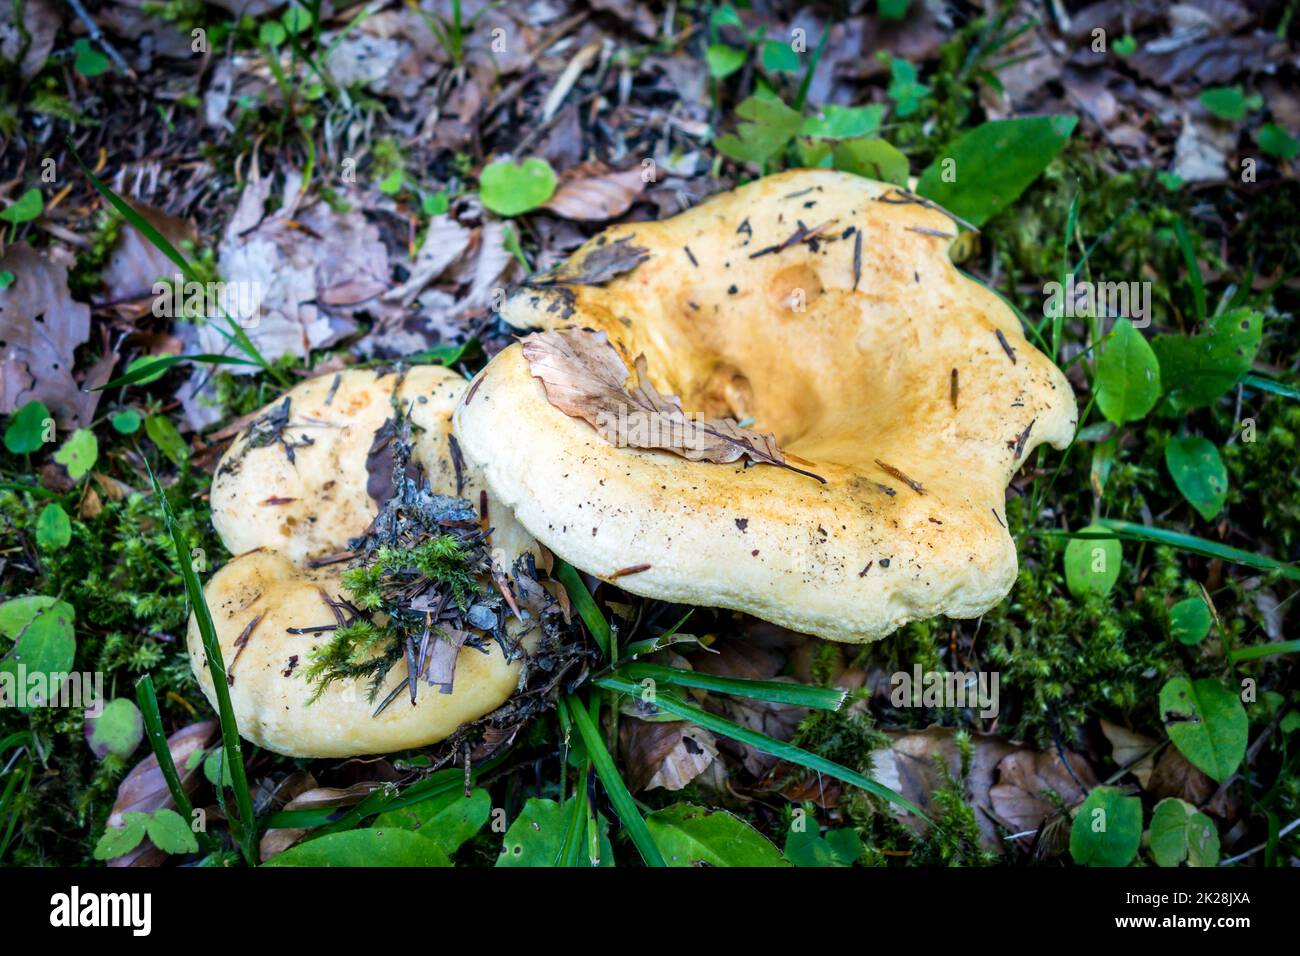 Mushroom closeup view in a forest Stock Photo